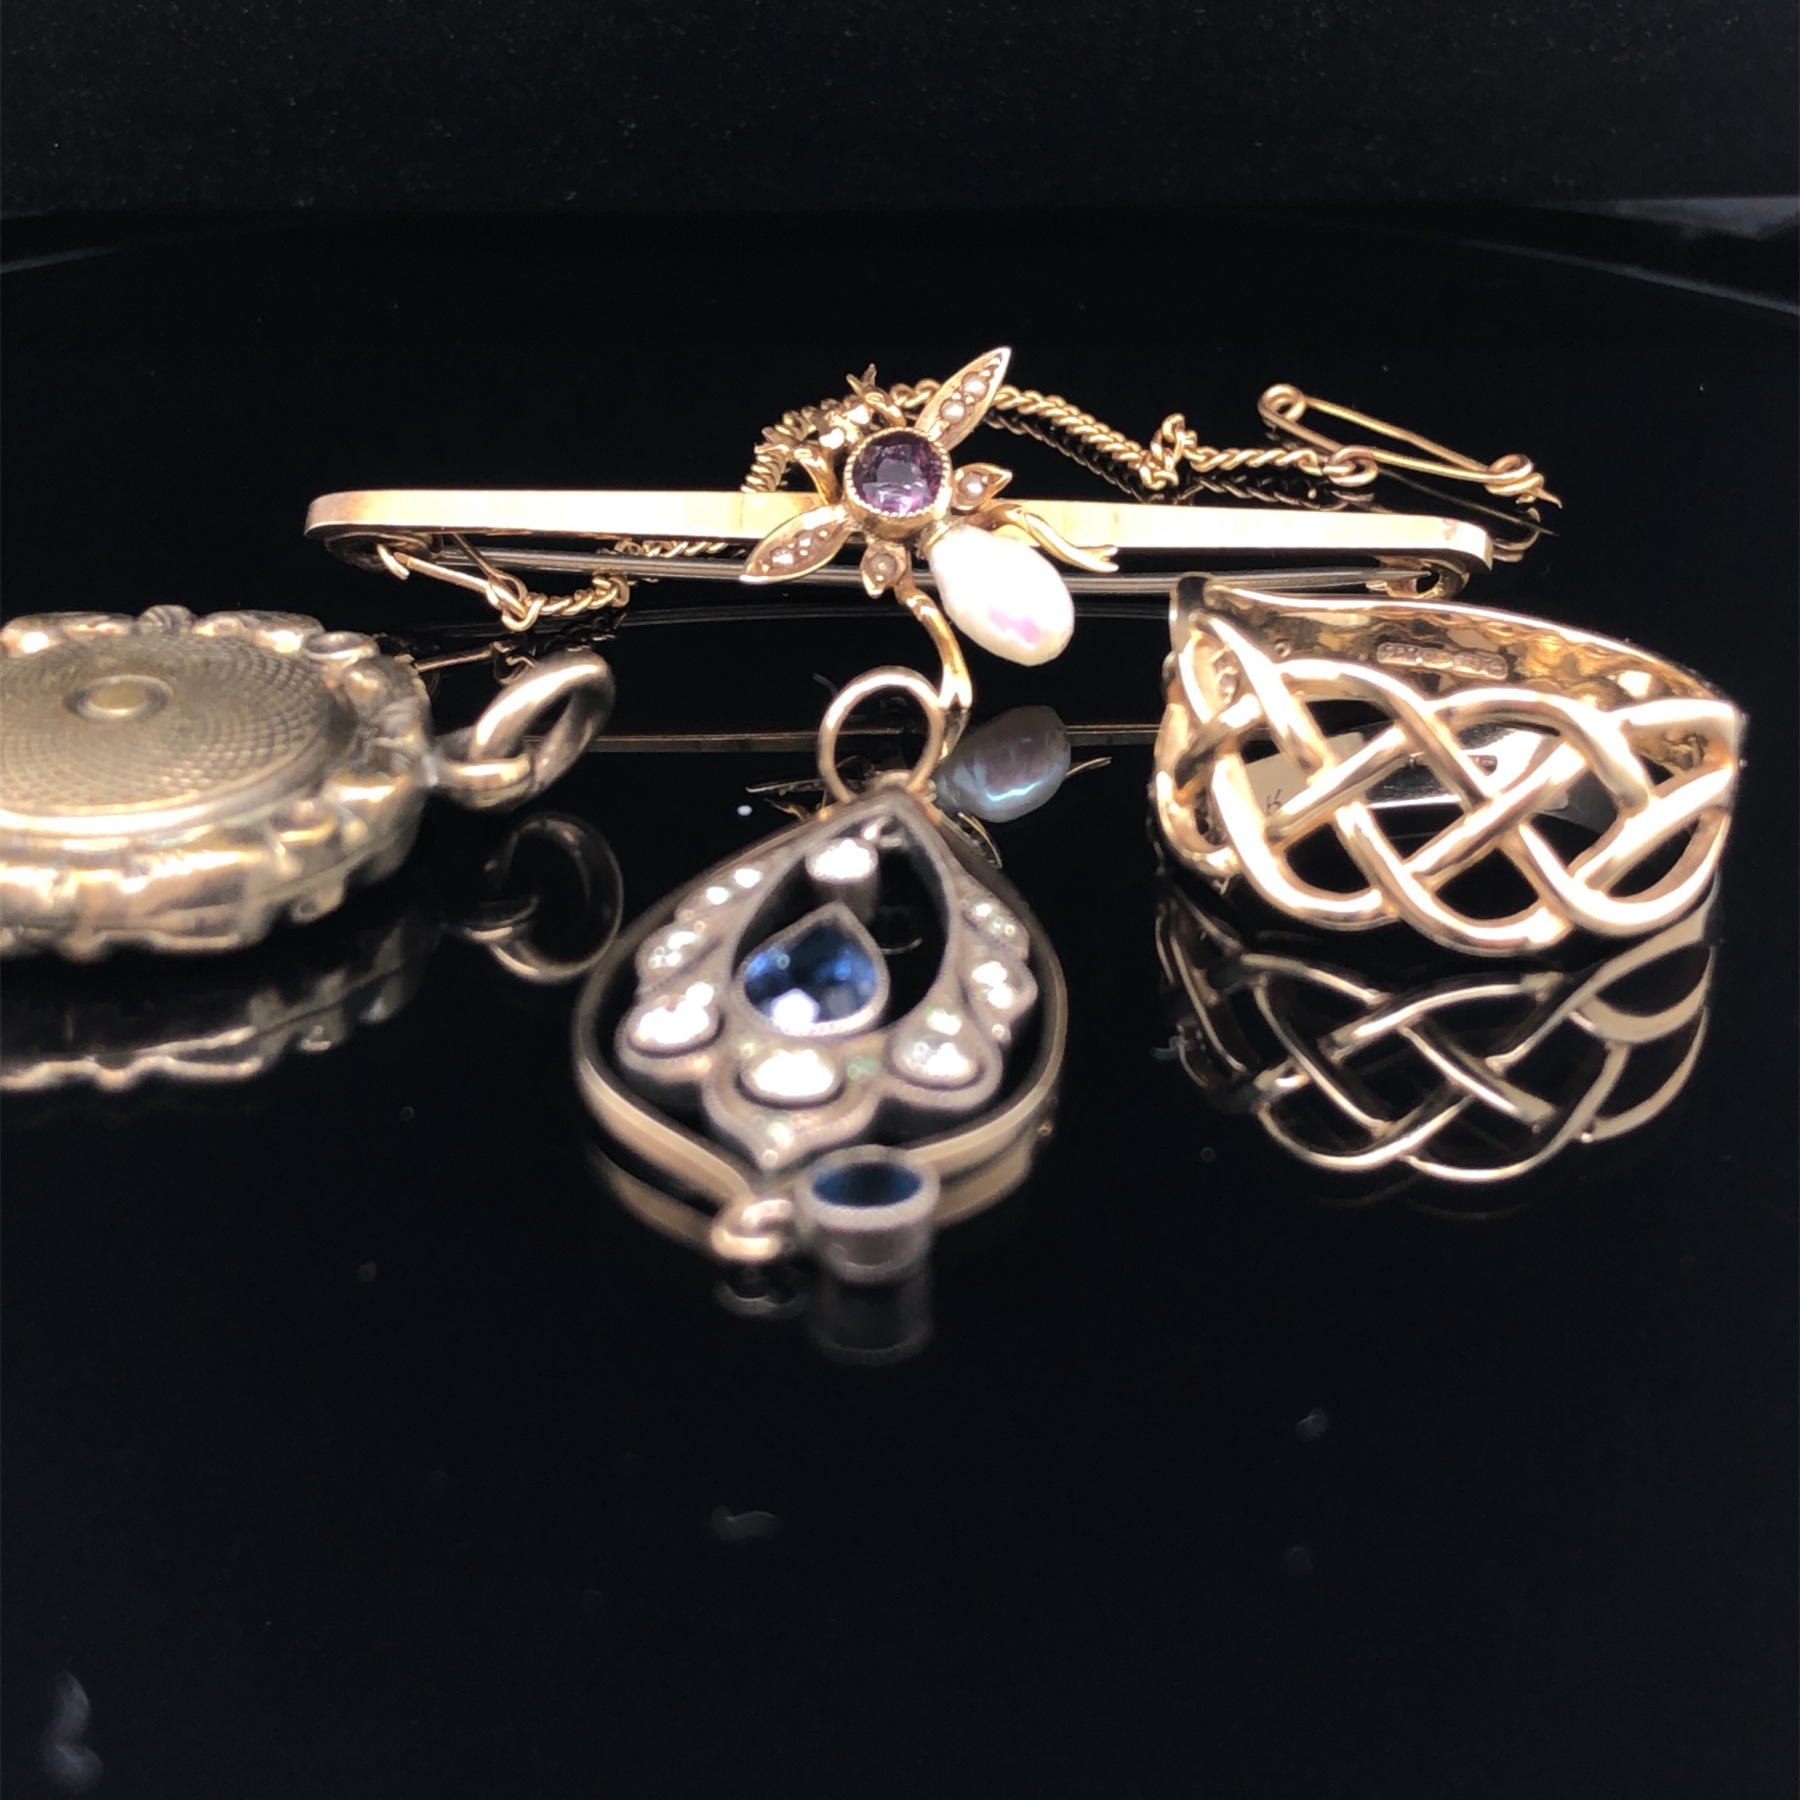 AN EDWARDIAN 9ct GOLD SEED PEARL AND AMETHYST INSECT BAR BROOCH, TOGETHER WITH AN EDWARDIAN 9ct GOLD - Image 3 of 6